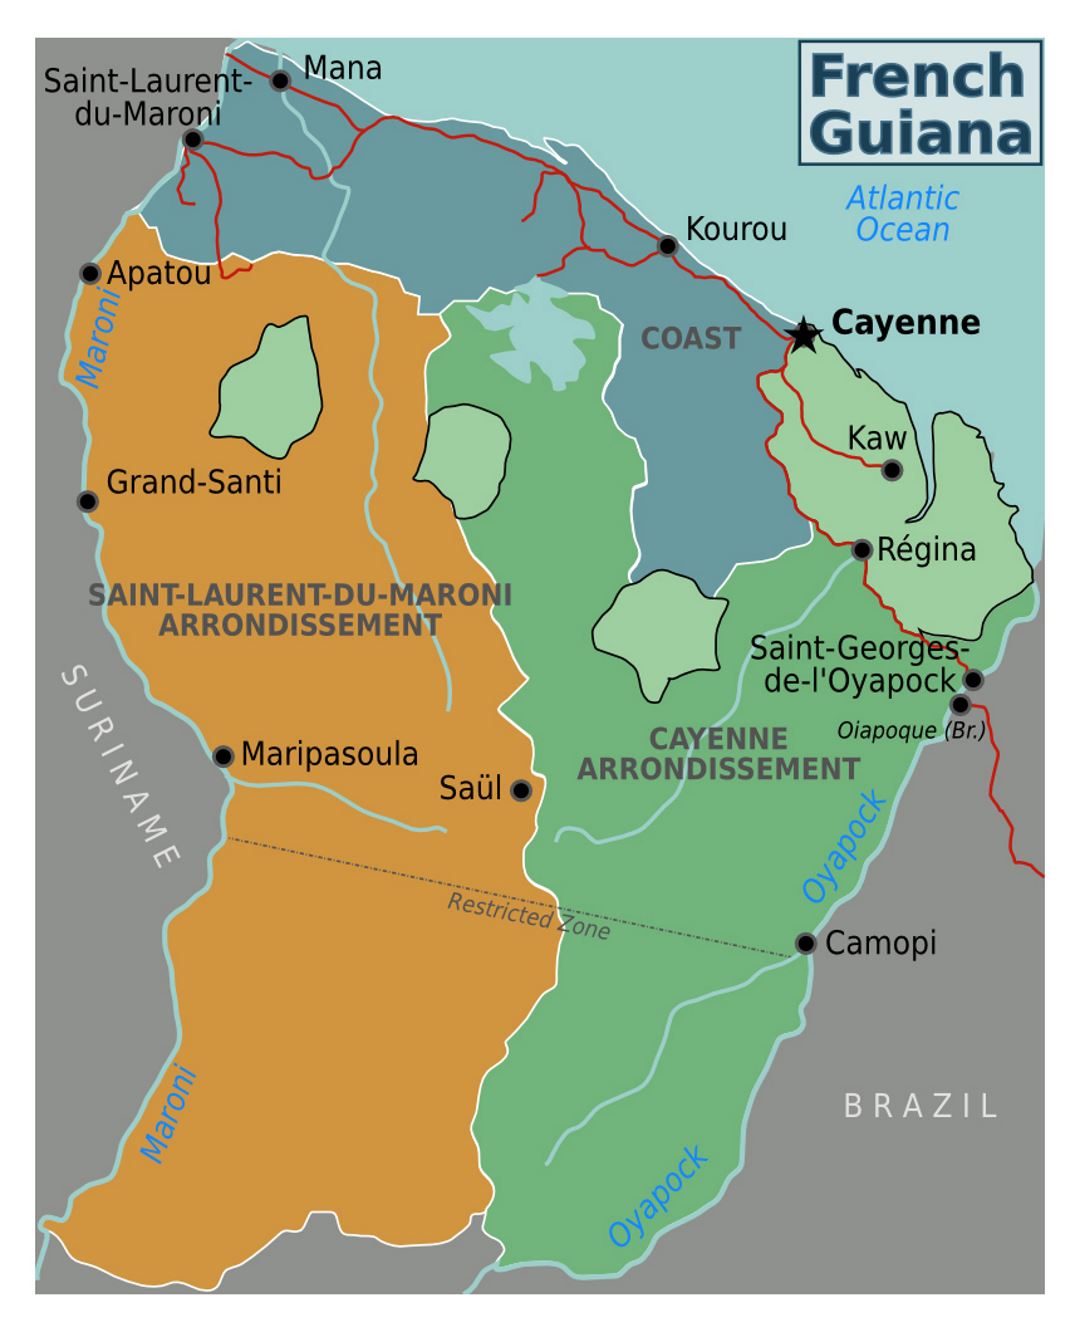 Detailed regions map of French Guiana